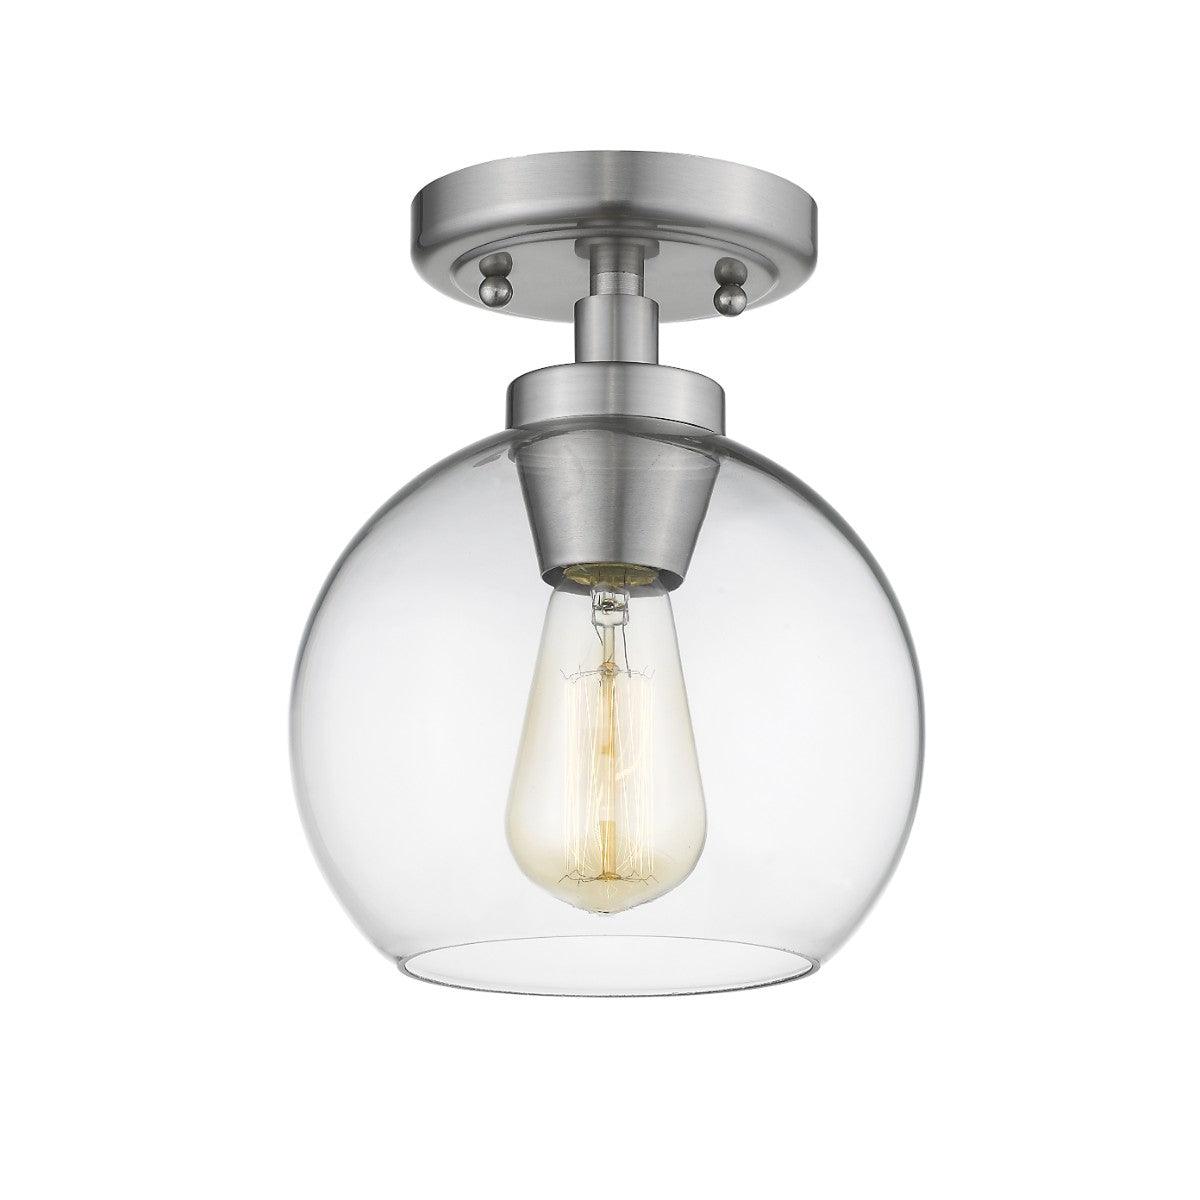 Galveston 9 in. Semi Flush Mount Light with Clear Glass